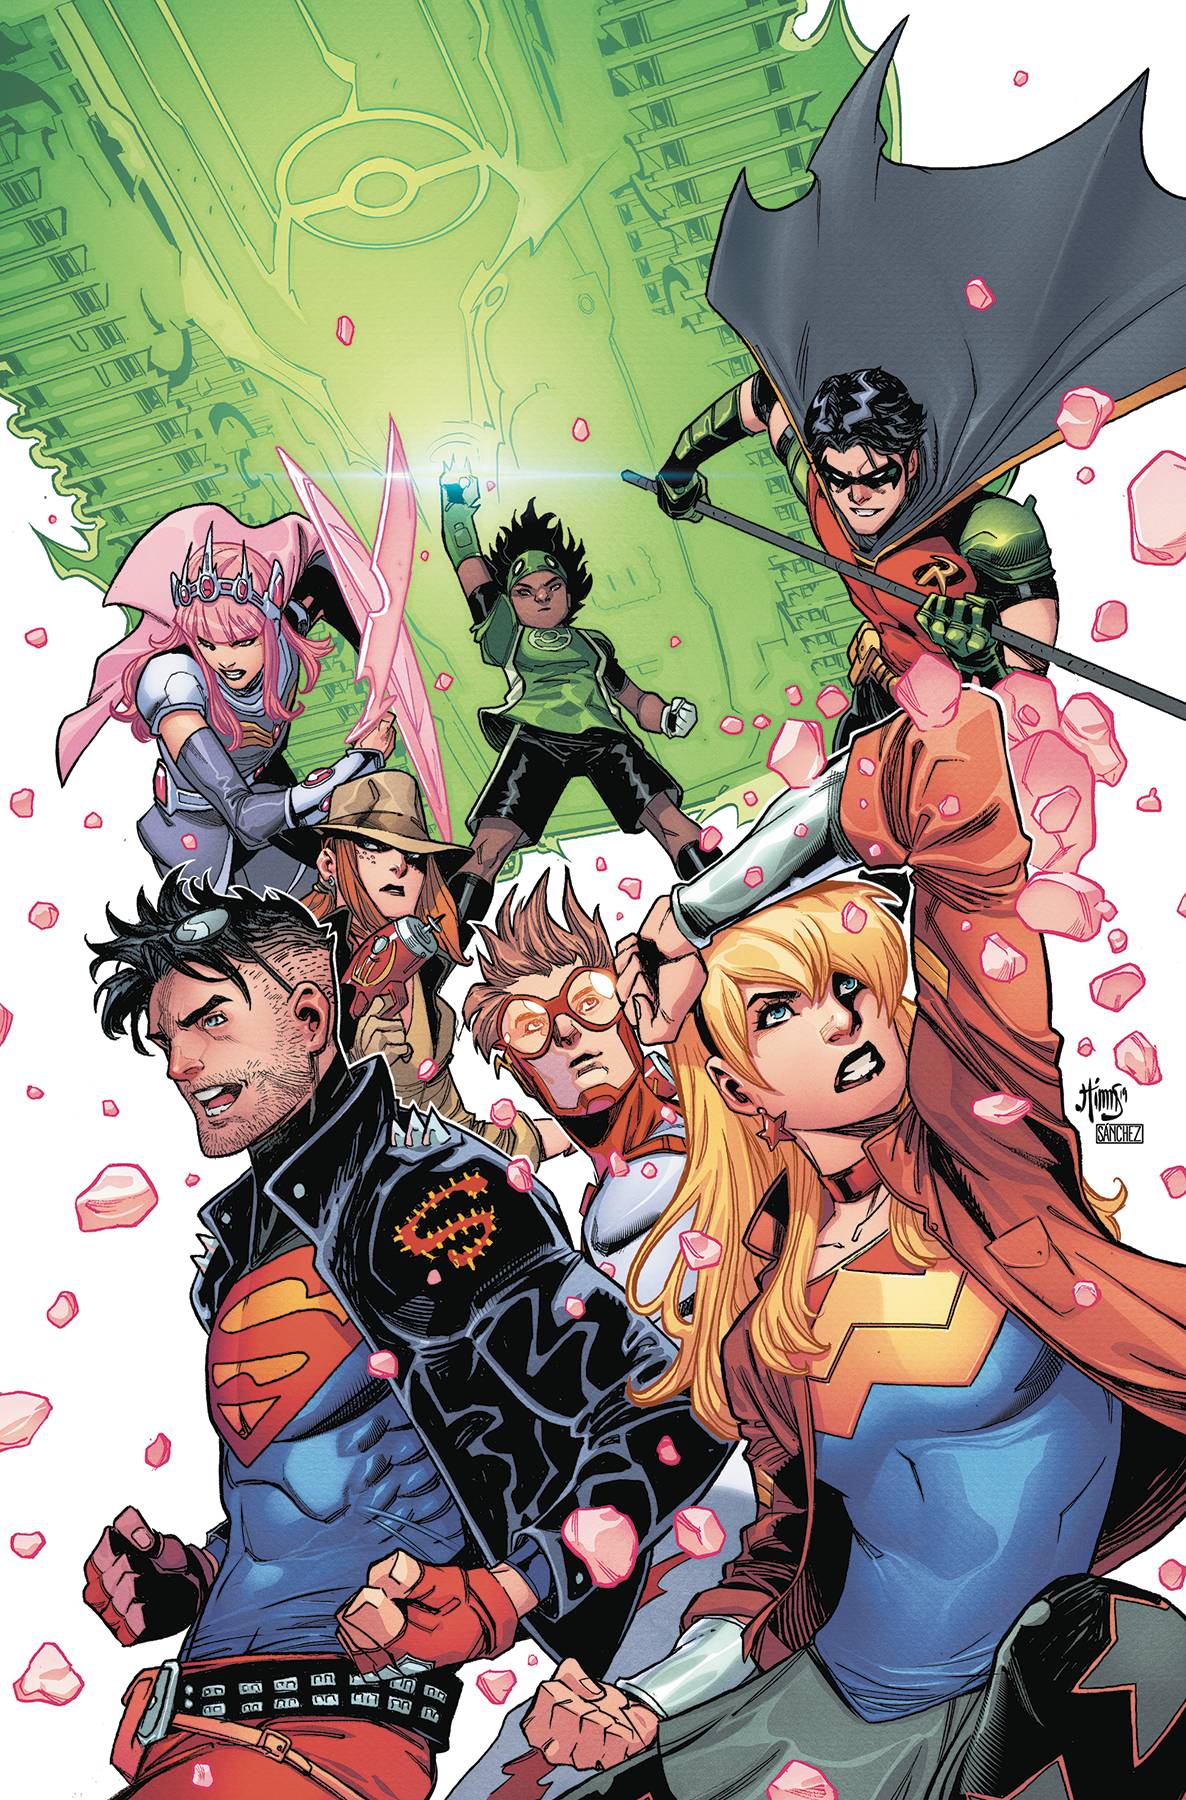 06/05/2019 YOUNG JUSTICE #6